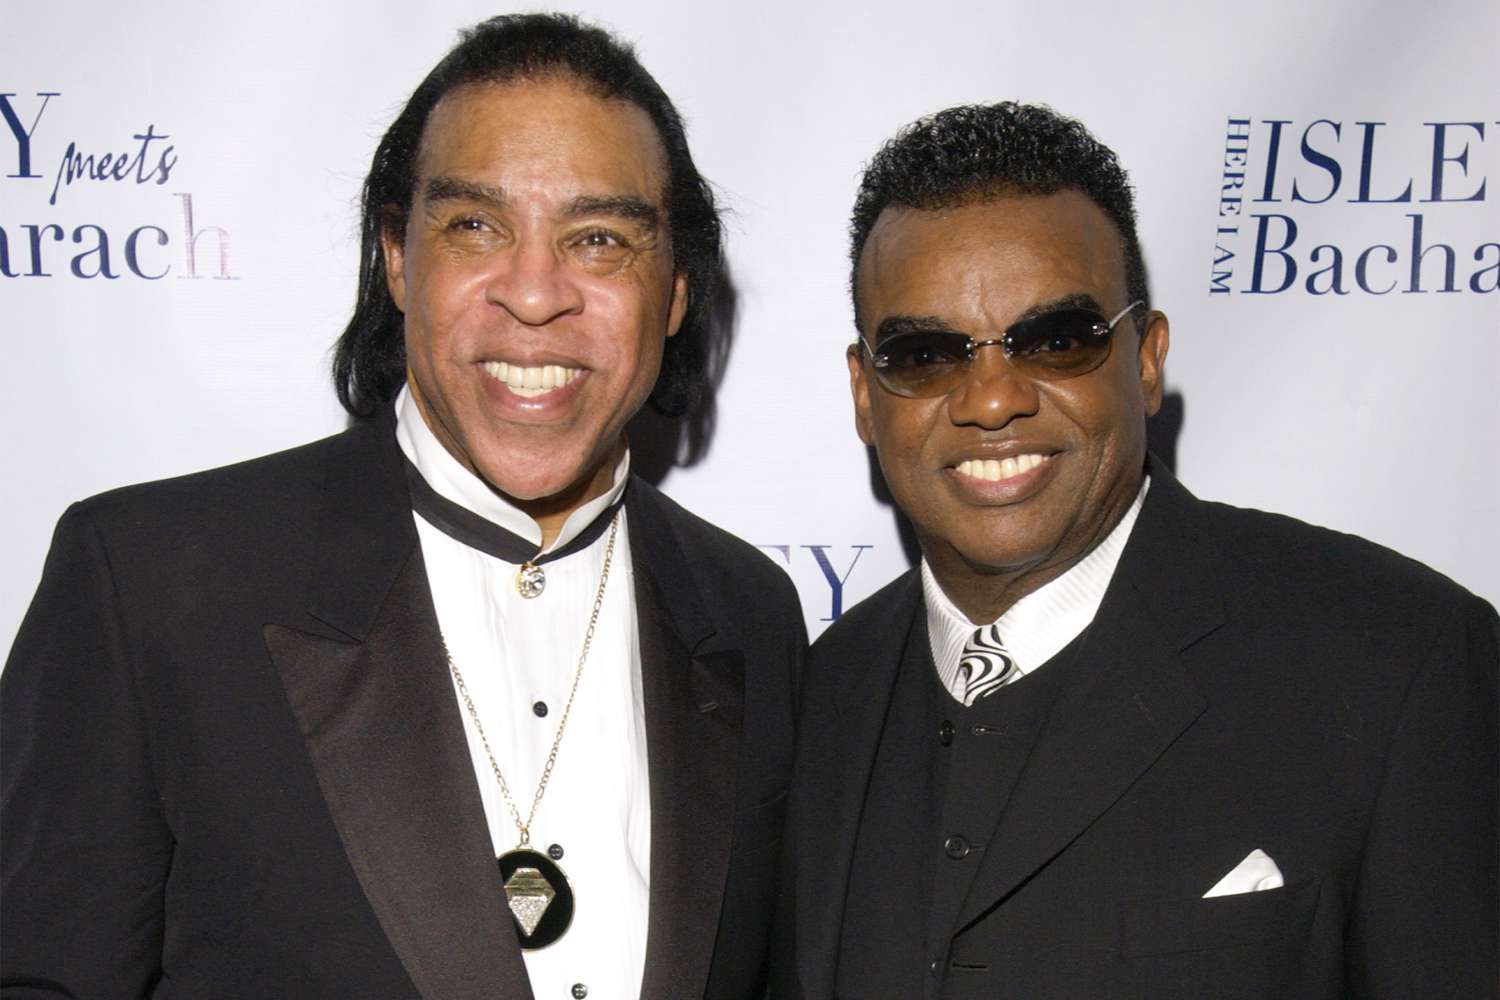 Rudolph Isley Of The Isley Brothers Passes Away At 84: A Musical Legend Remembered